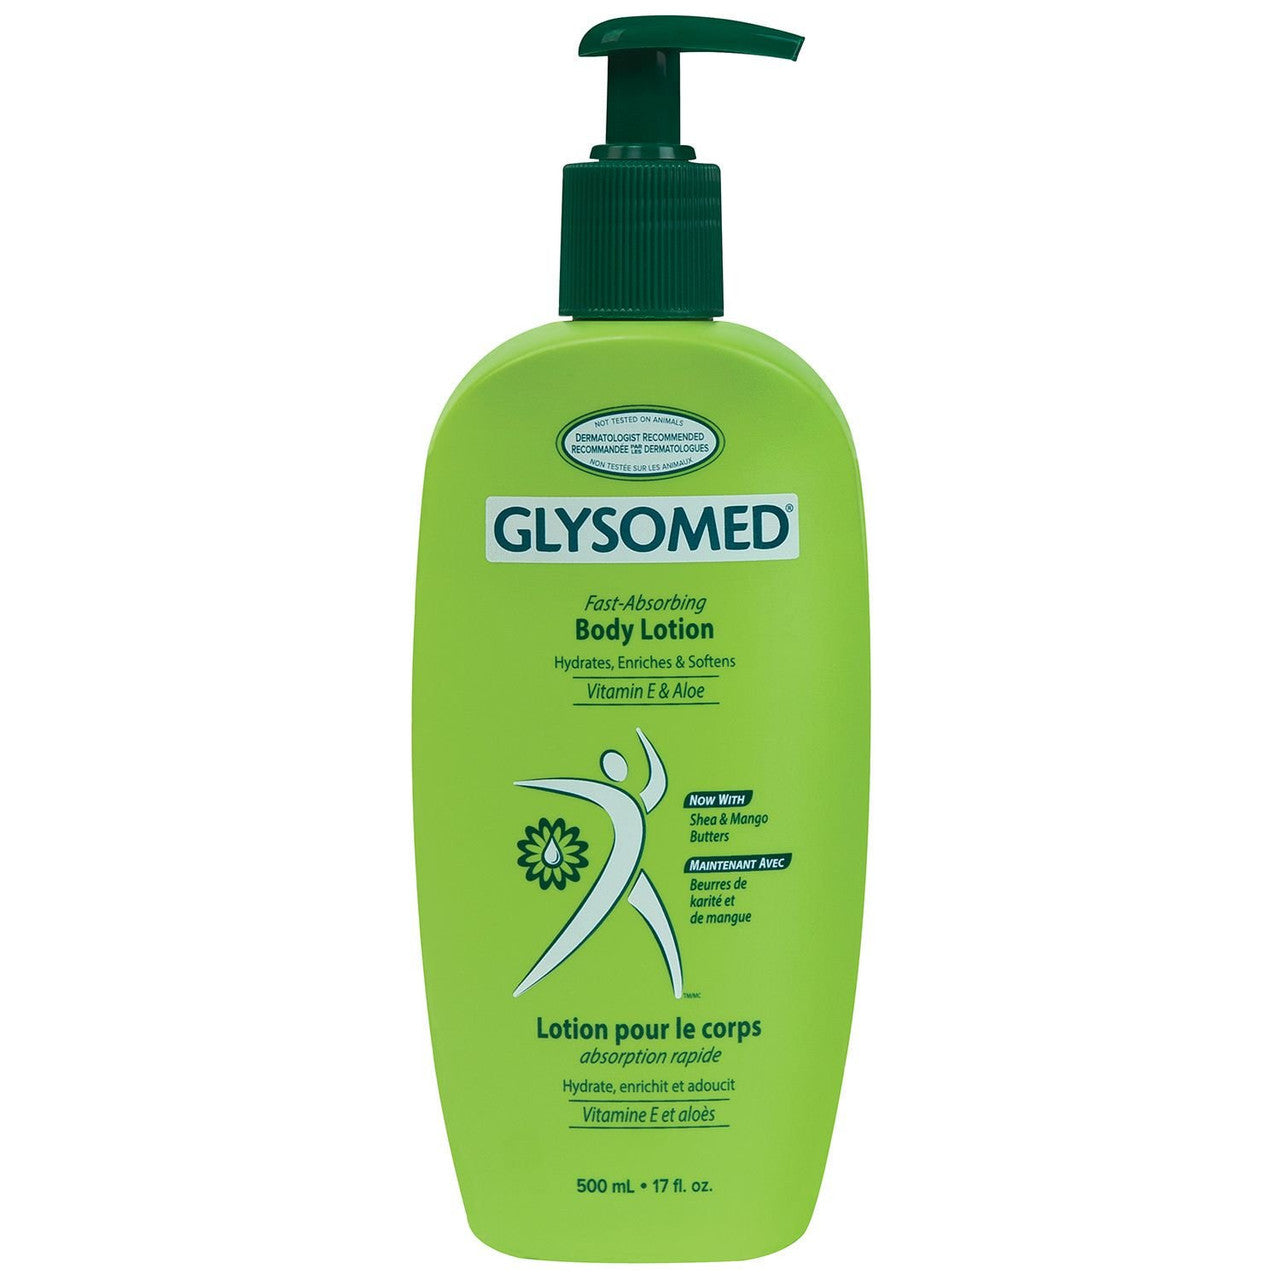 Glysomed Body Lotion - 17 Oz bottle {Imported from Canada}